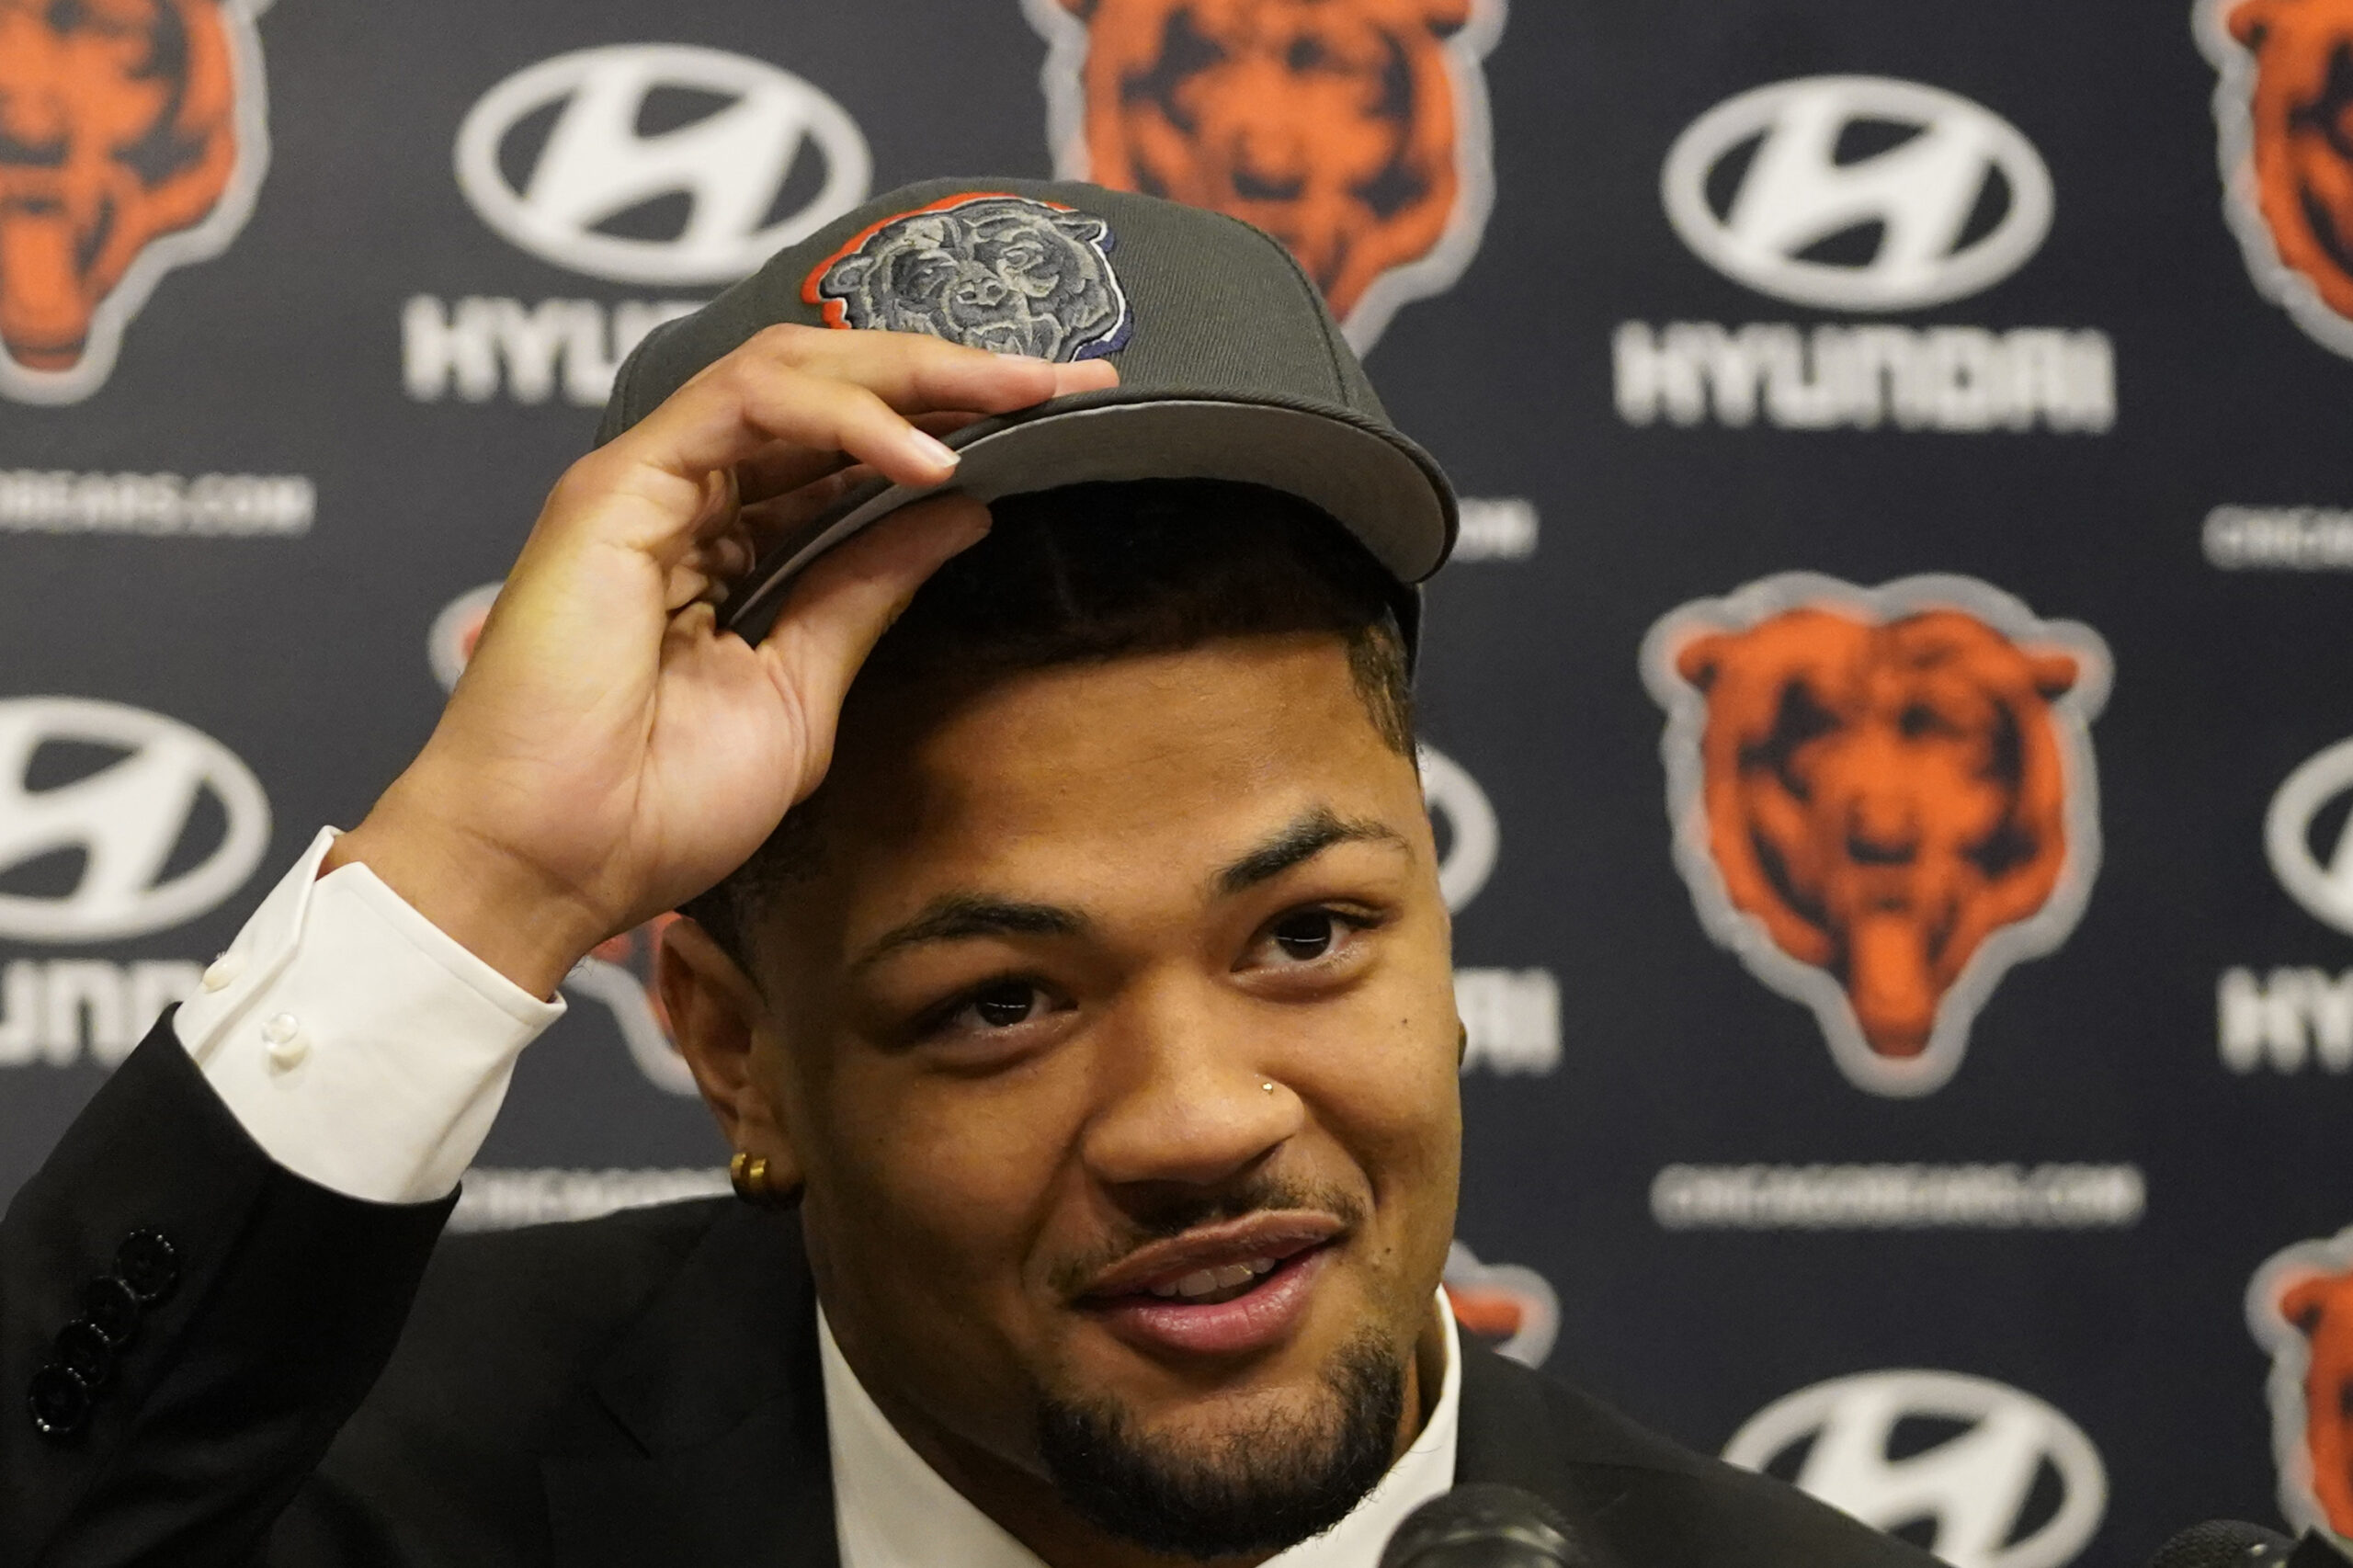 The Top Draft Gem in the NFC North